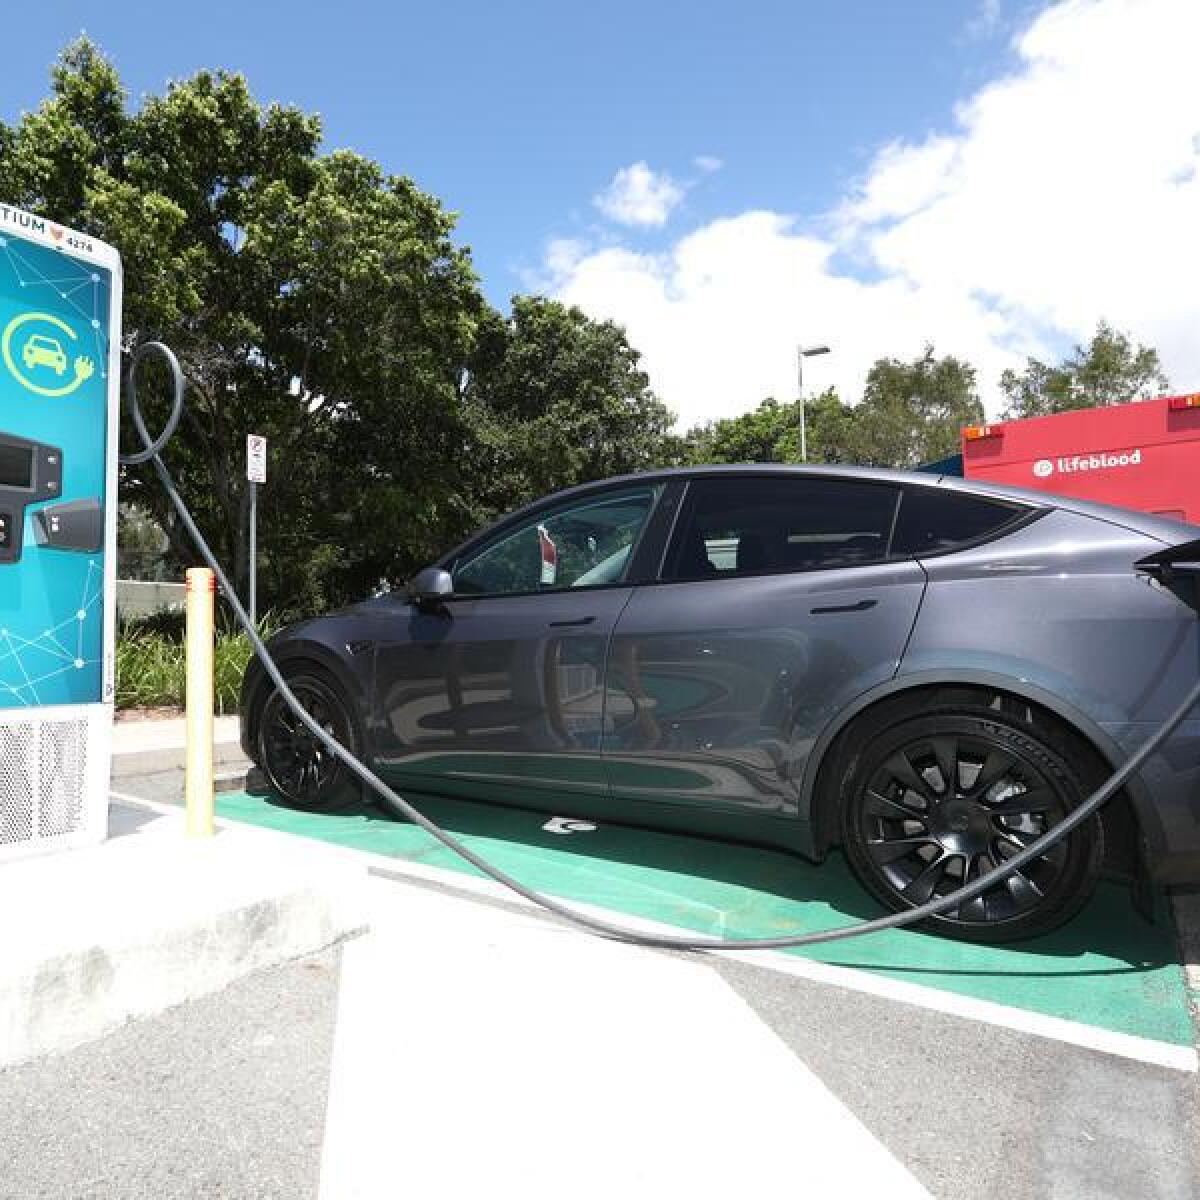 An EV at a charging station.